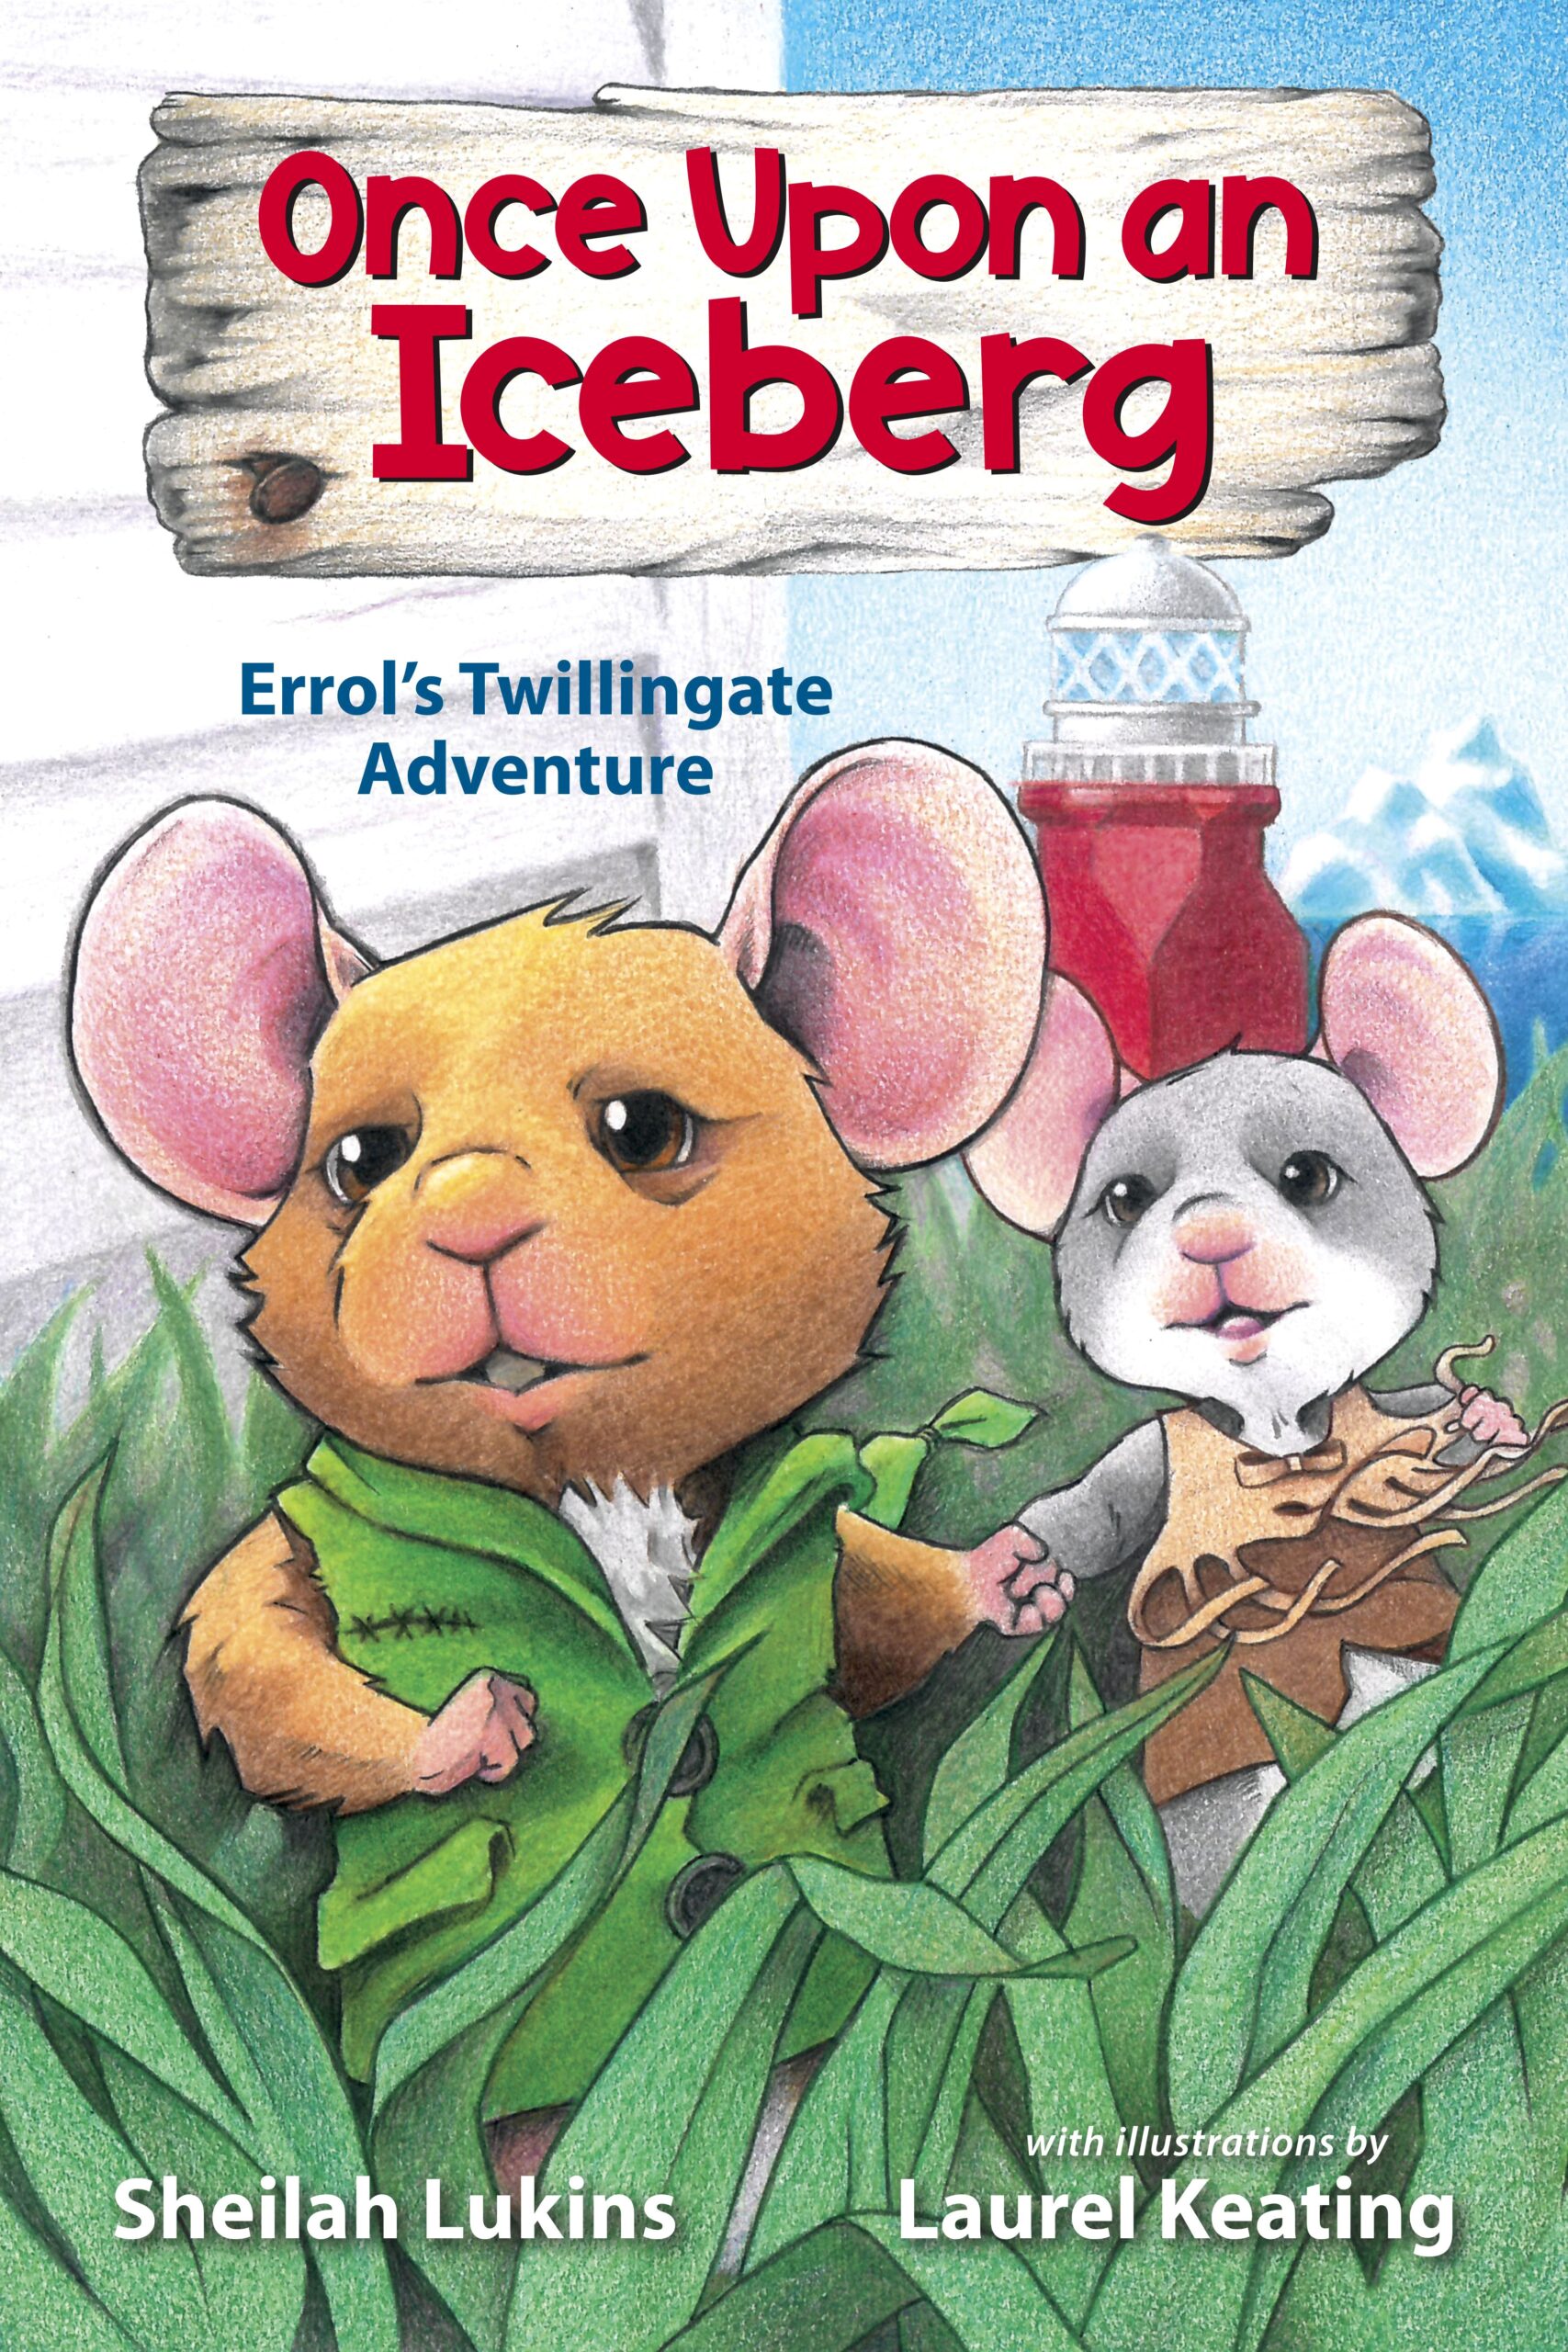 Young Reader Review: Once Upon an Iceberg: Errol’s Twillingate Adventure